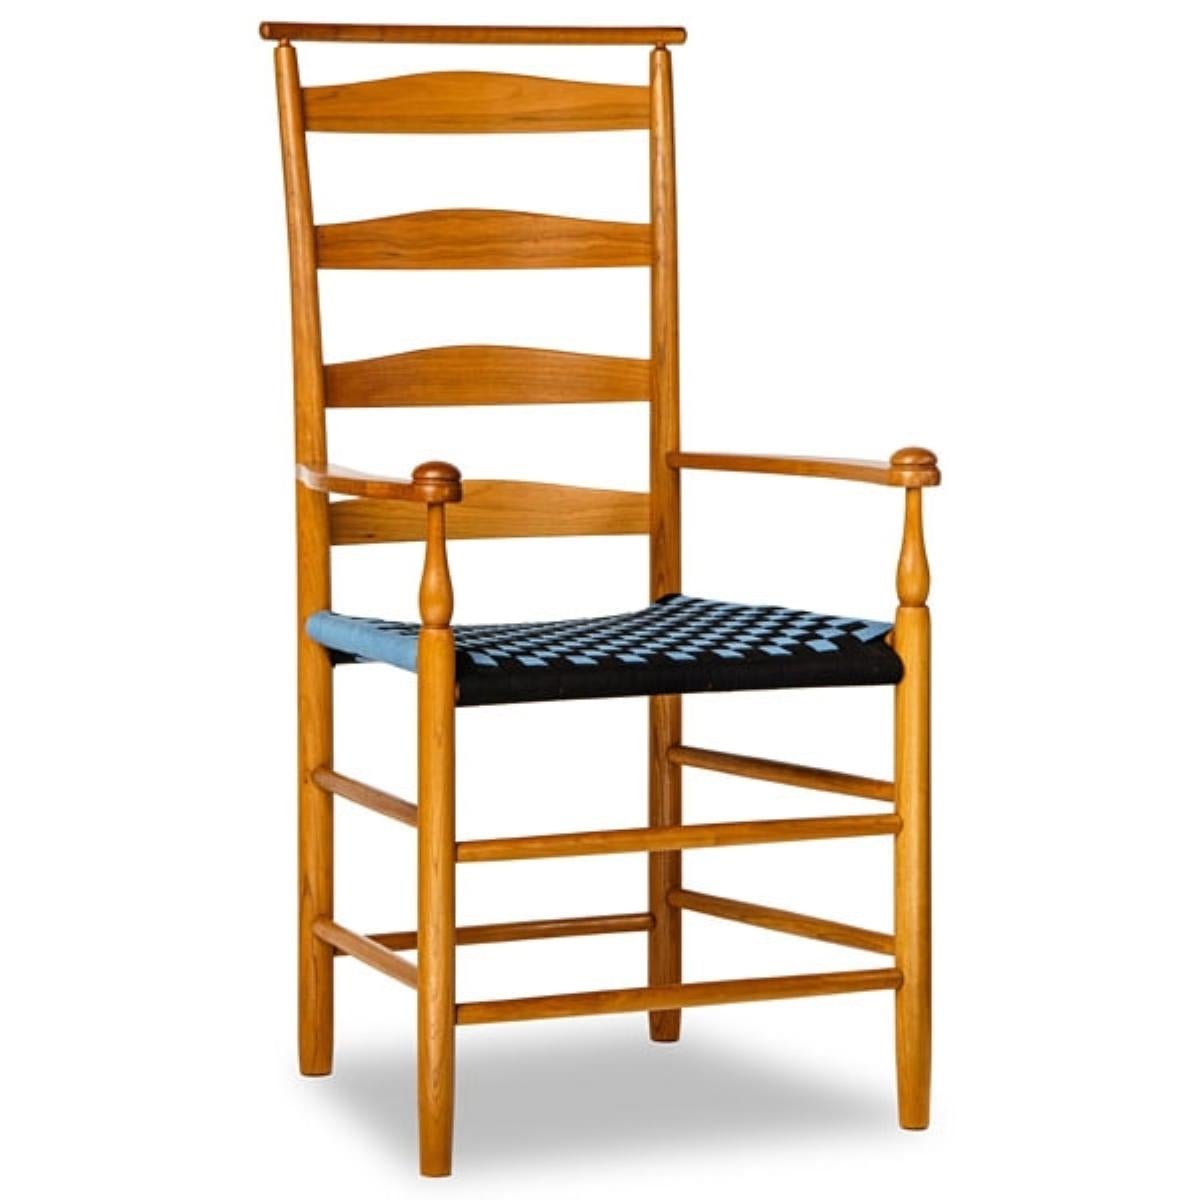 In 18th to Early Century, The Mt. Lebanon Shakers produced chairs that are turned, shaped, and sanded with a result which really cannot be equalled for quality. They are comfortable, too. The gently curved back slats and overall proportions make